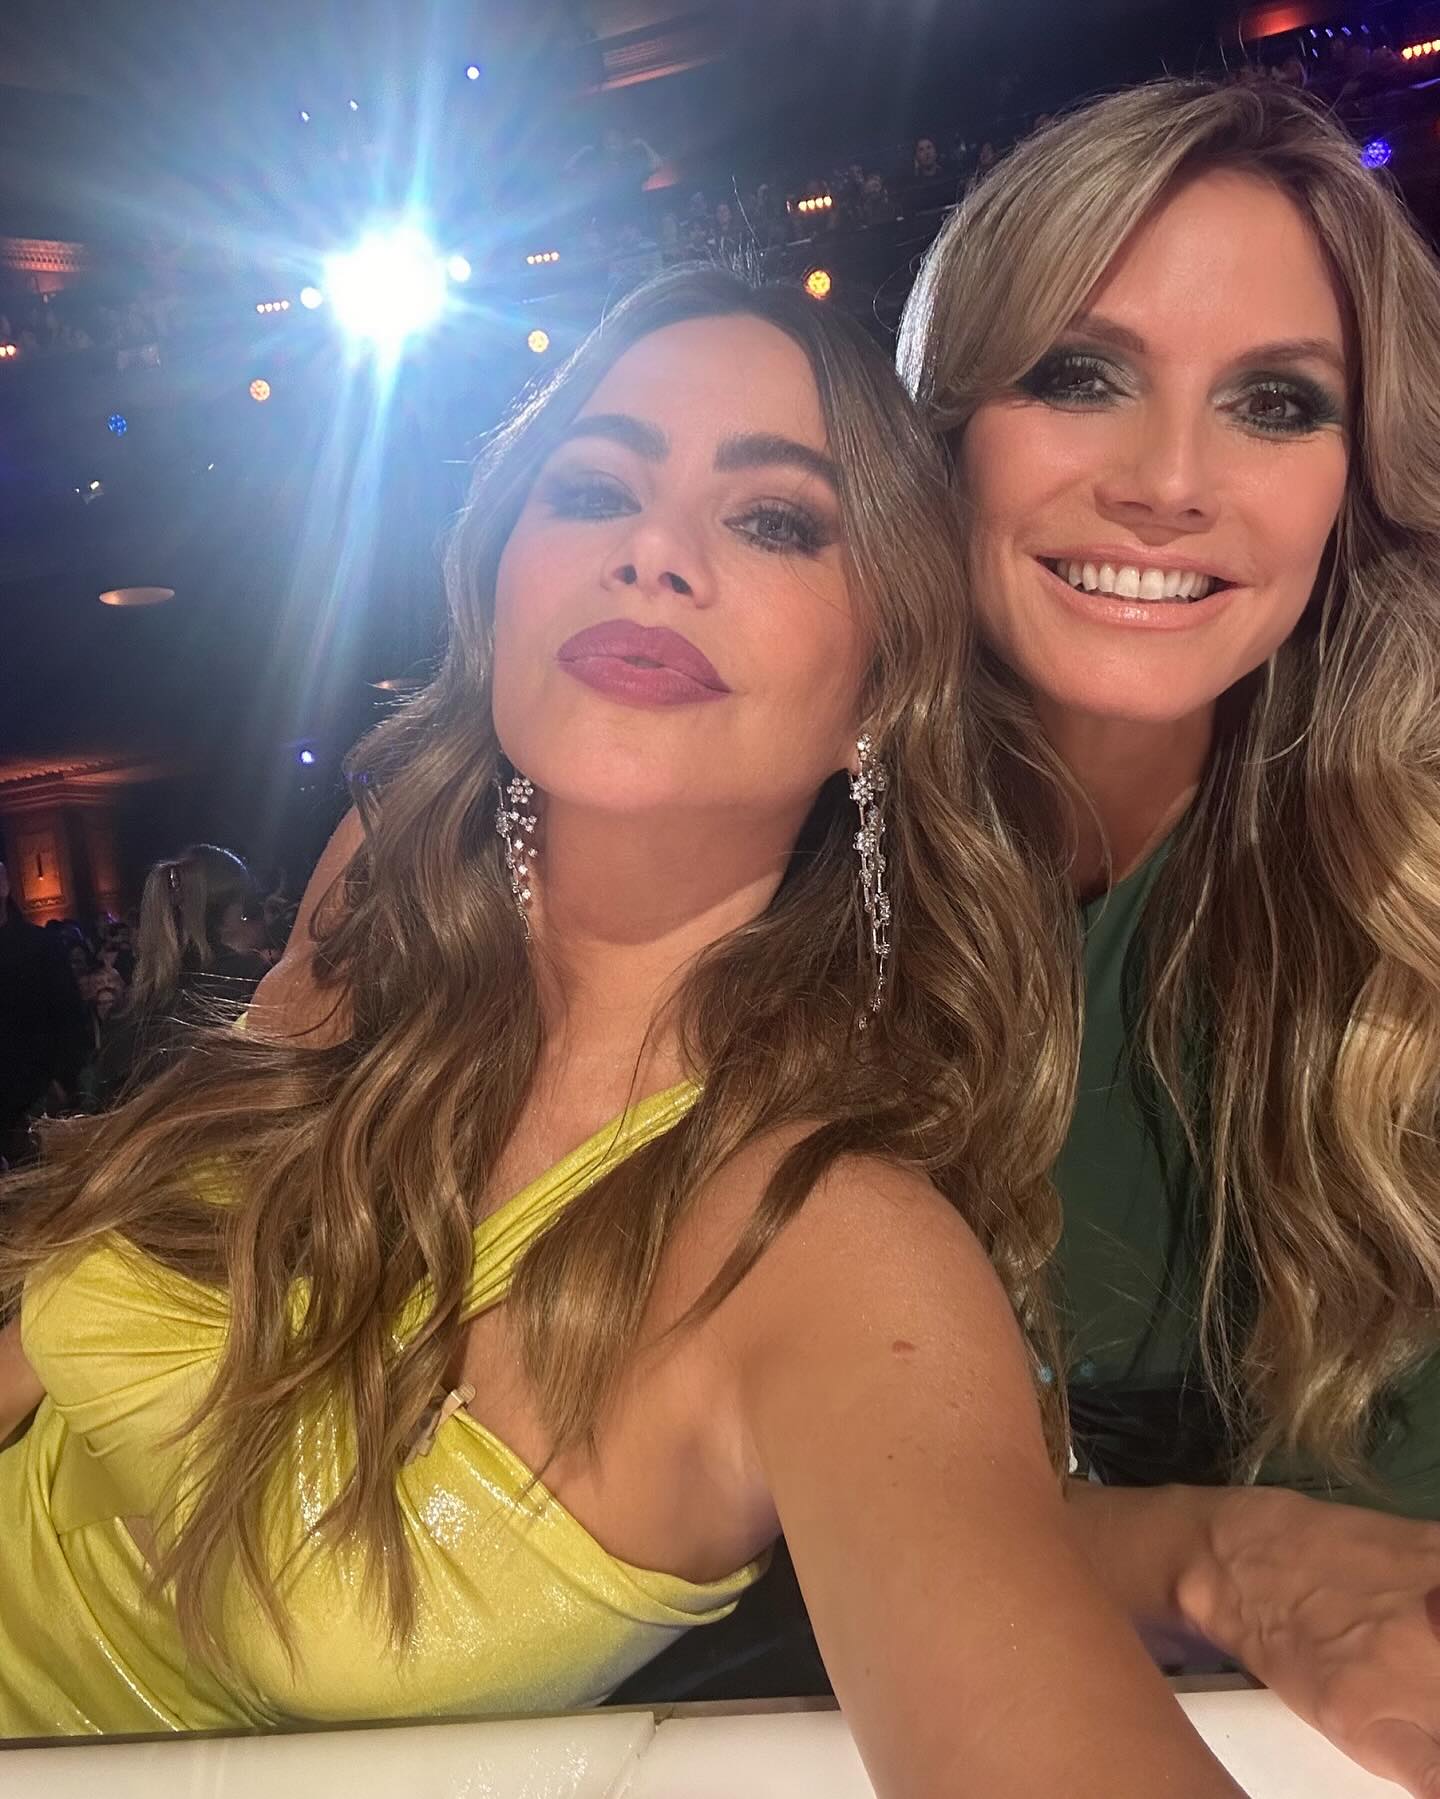 Sofia Vergara showed off her yellow dress while posing with Heidi on the AGT set